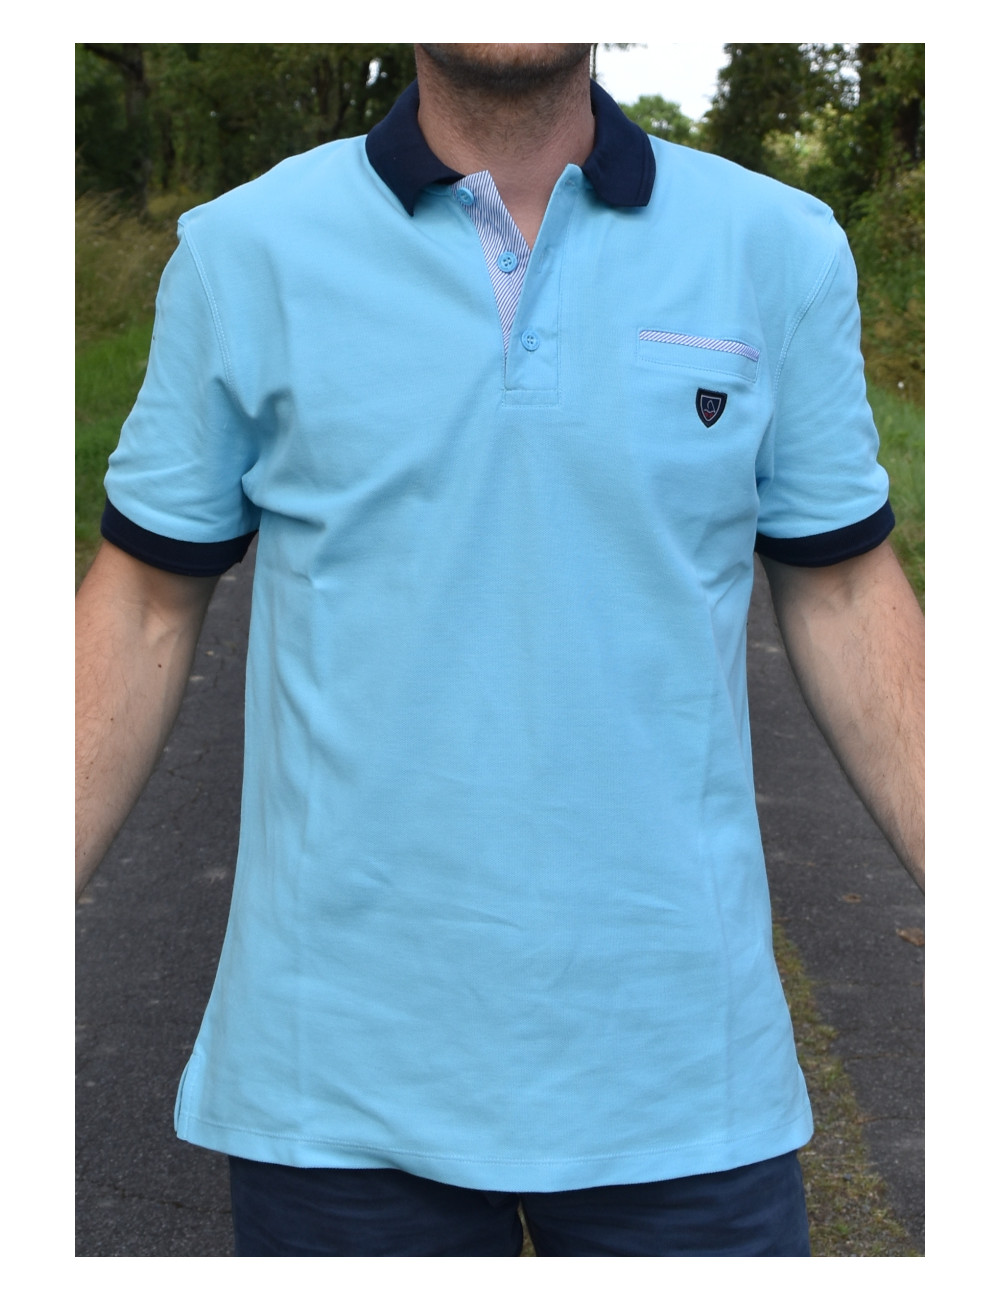 Polo en maille piqué 100% coton Turquoise Taille M Yachting Club